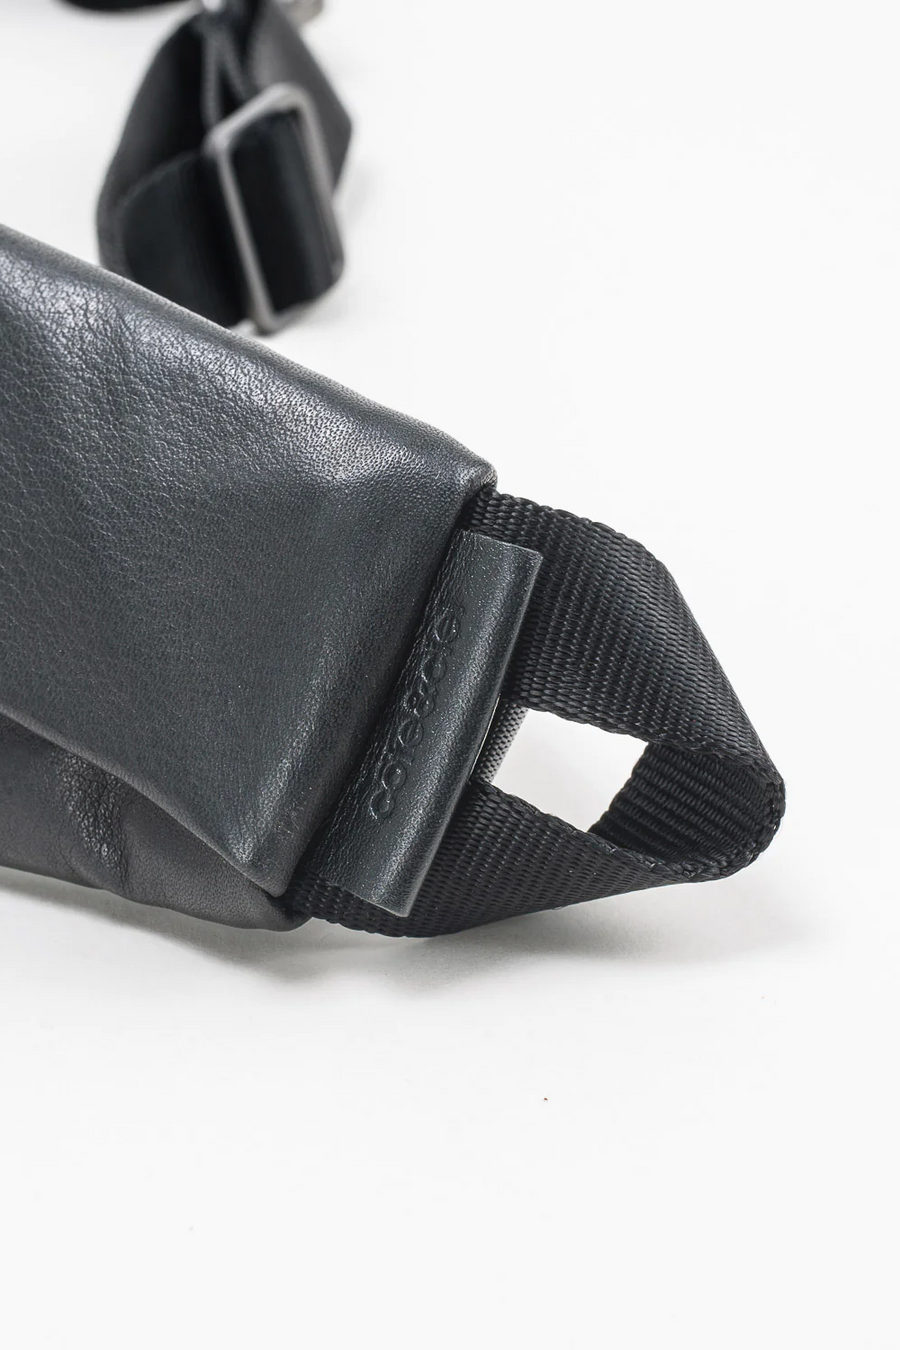 Buy the Cote & Ciel Adda Alias Cowhide Leather Gate Agate Cross Body Bag in Black at Intro. Spend £50 for free UK delivery. Official stockists. We ship worldwide.